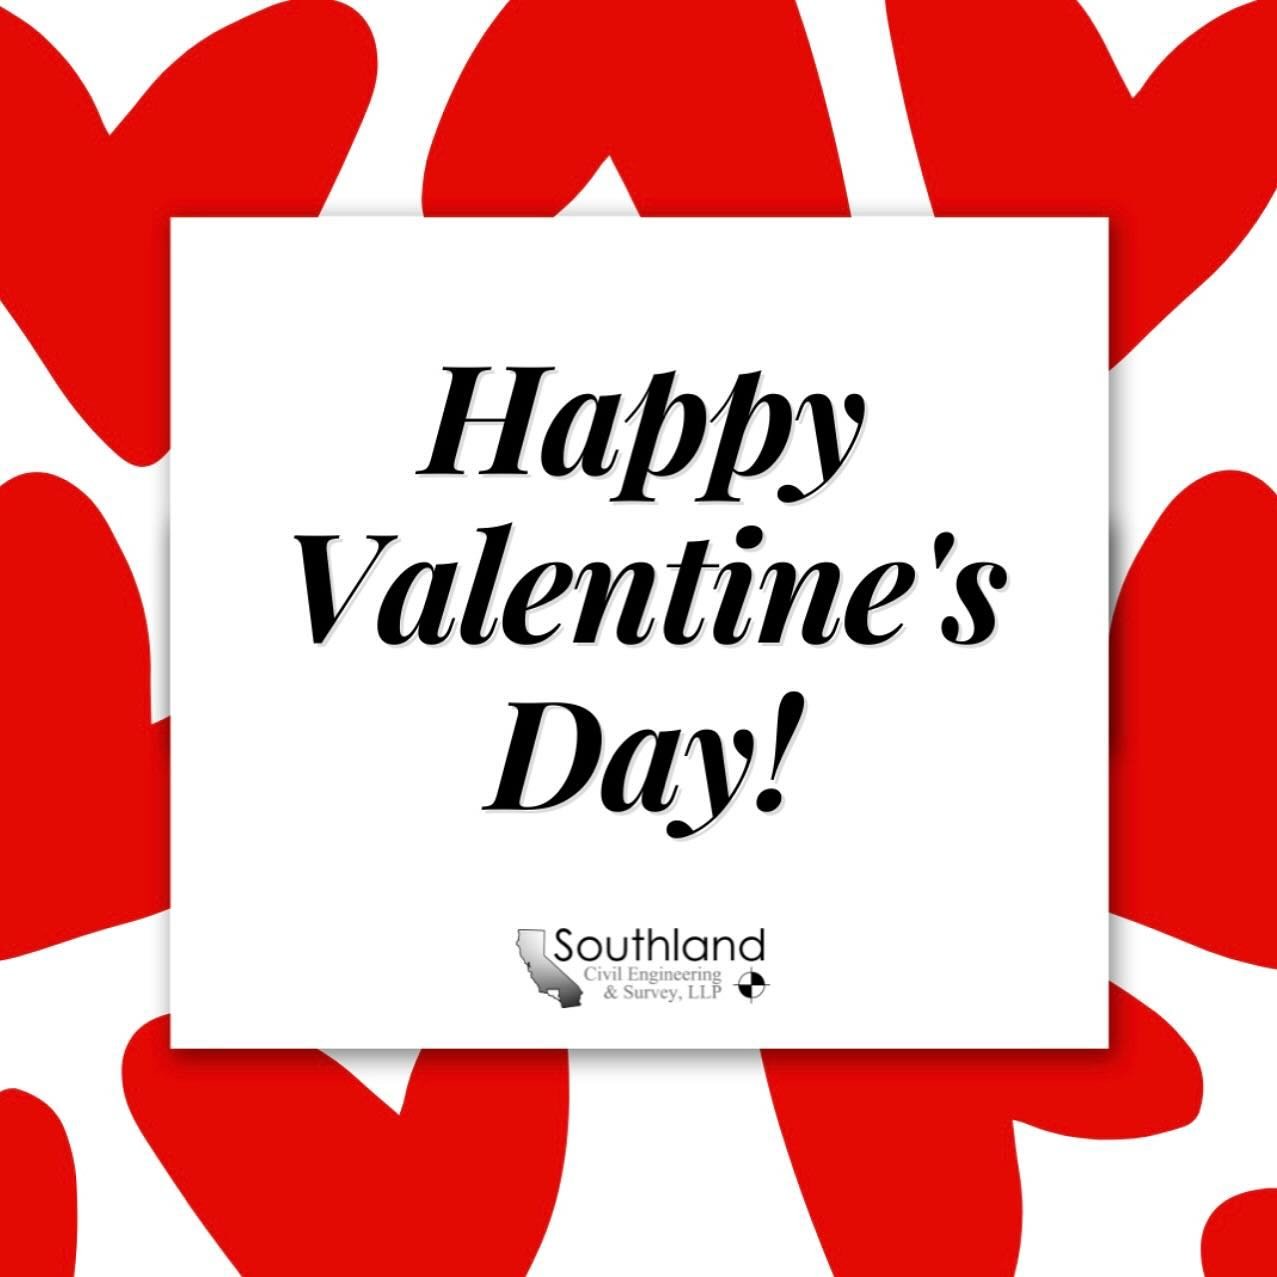 Happy Valentine&rsquo;s Day! 💌

Our love for Civil Engineering &amp; Surveying keeps growing every day! 

#loveday #civilengineering #landsurveying